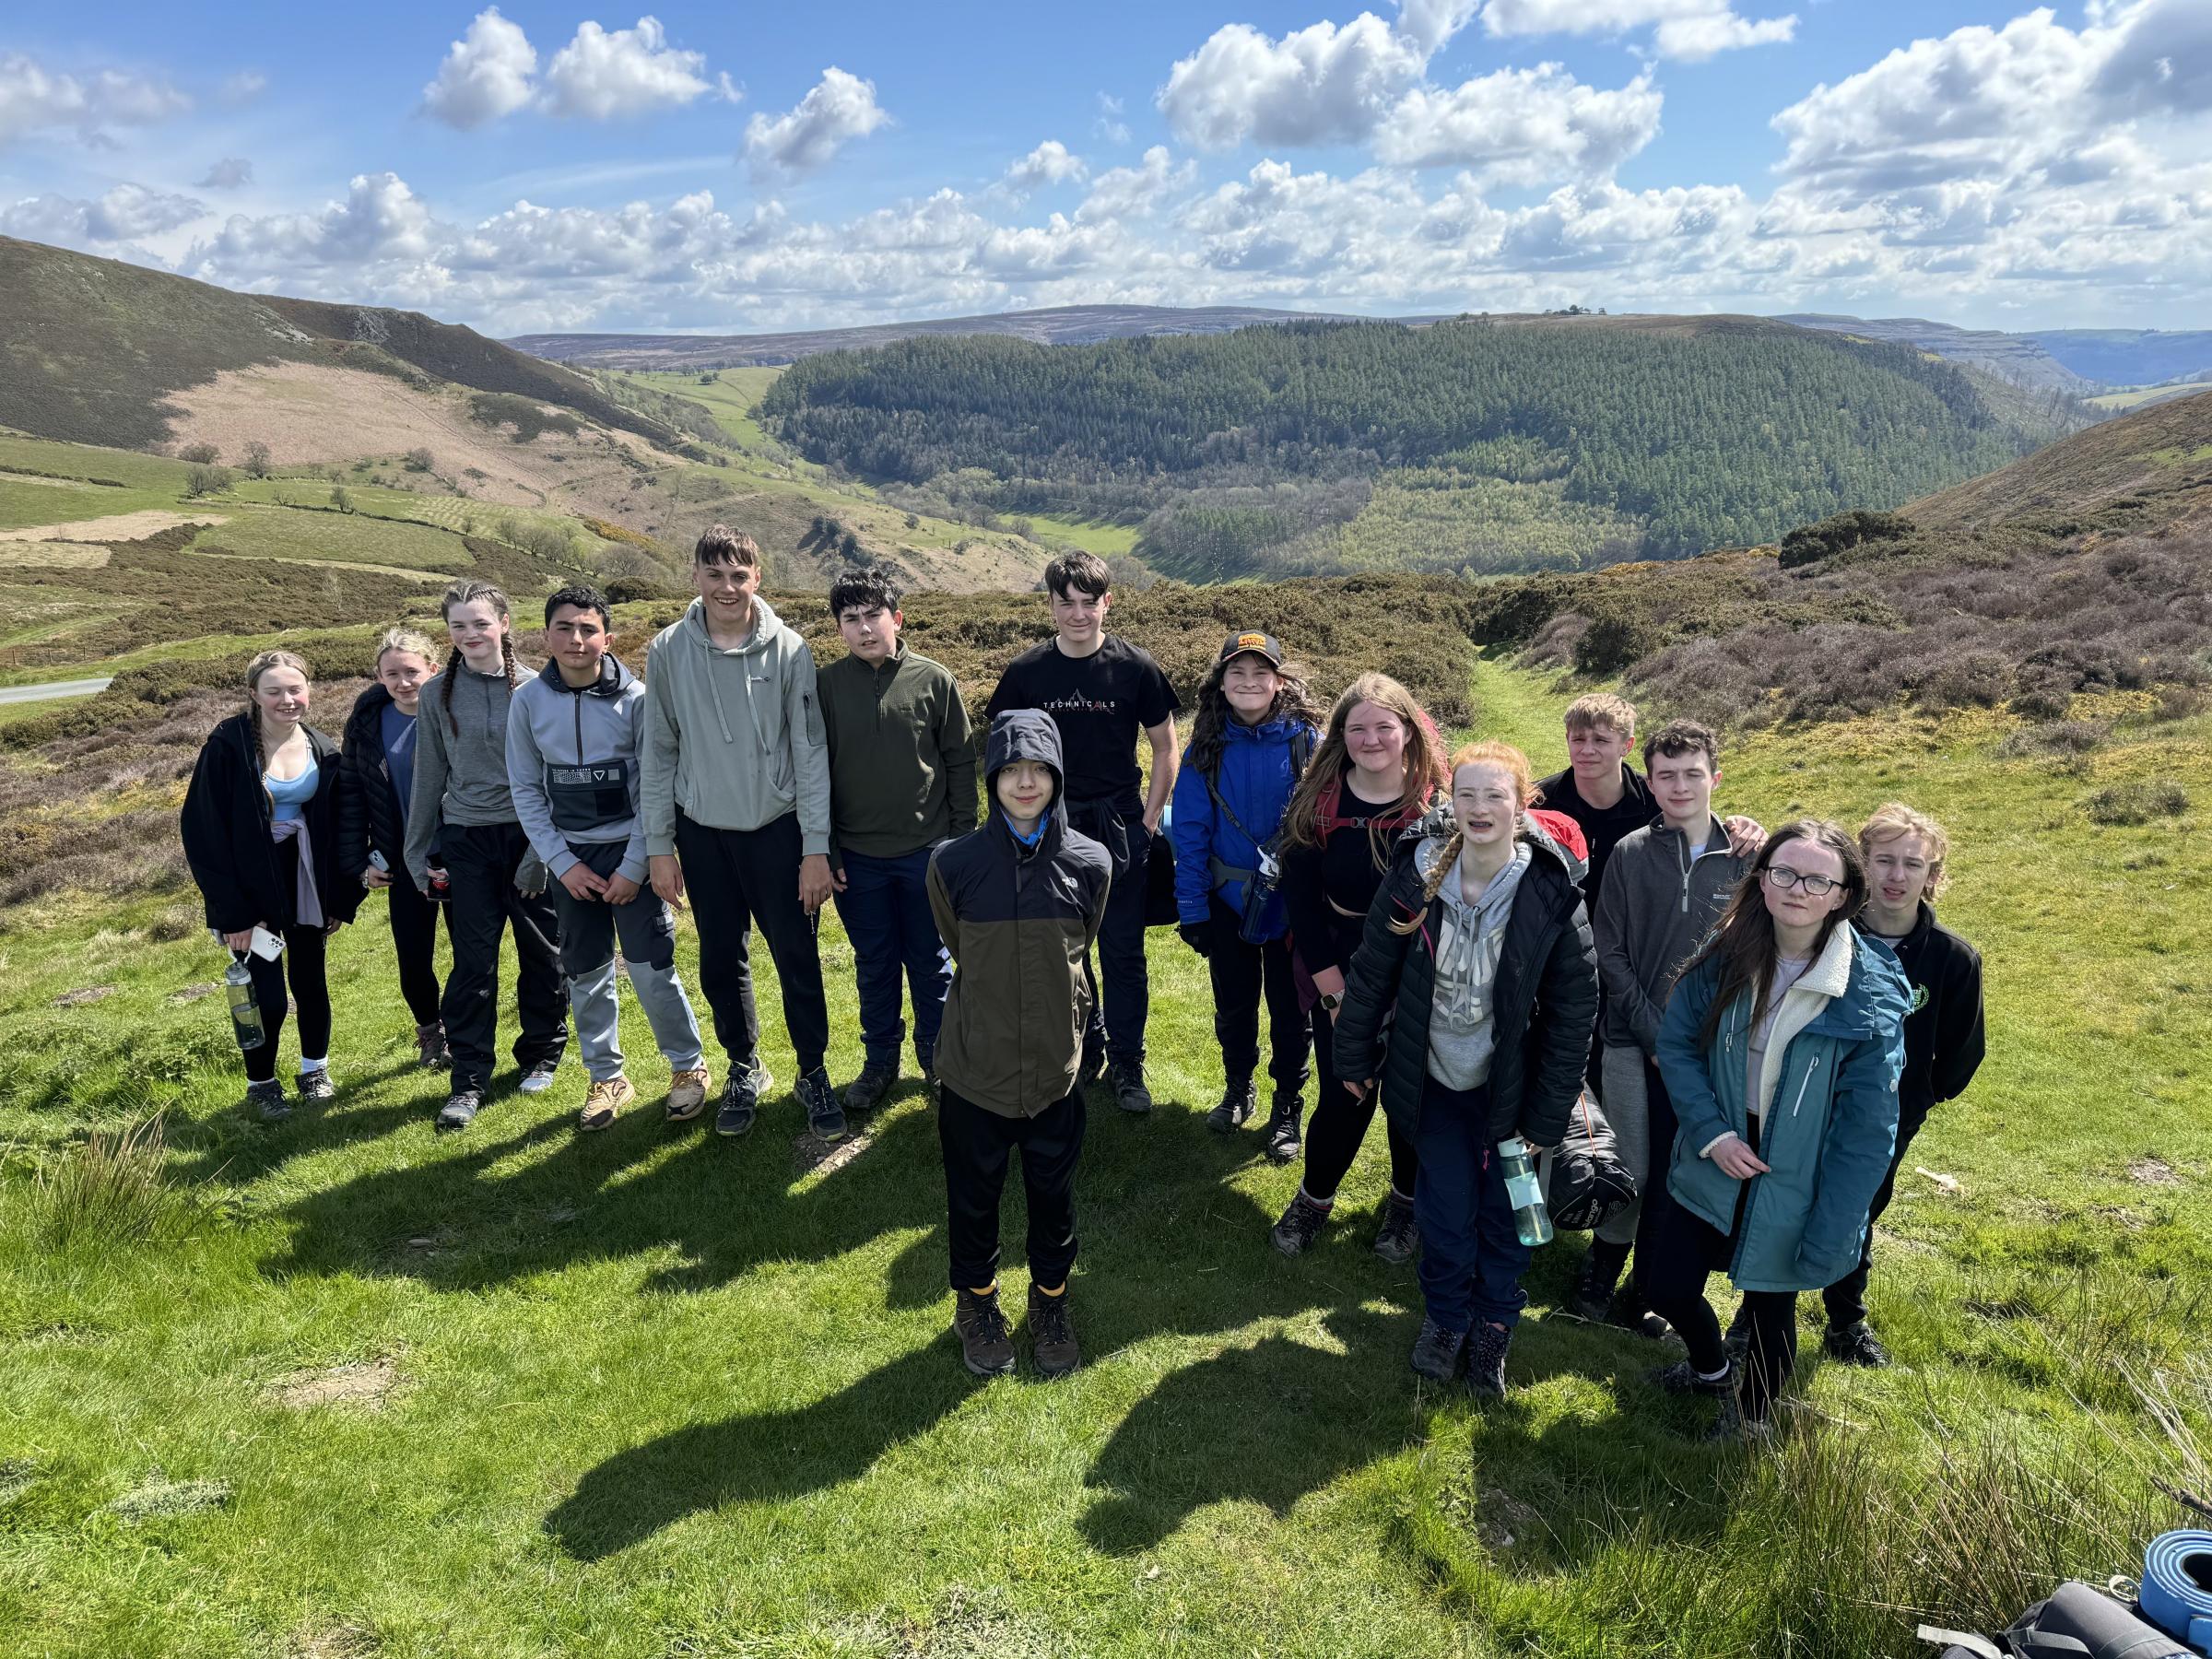 The students prepare to start their hike in the stunning countryside around Llangollen.